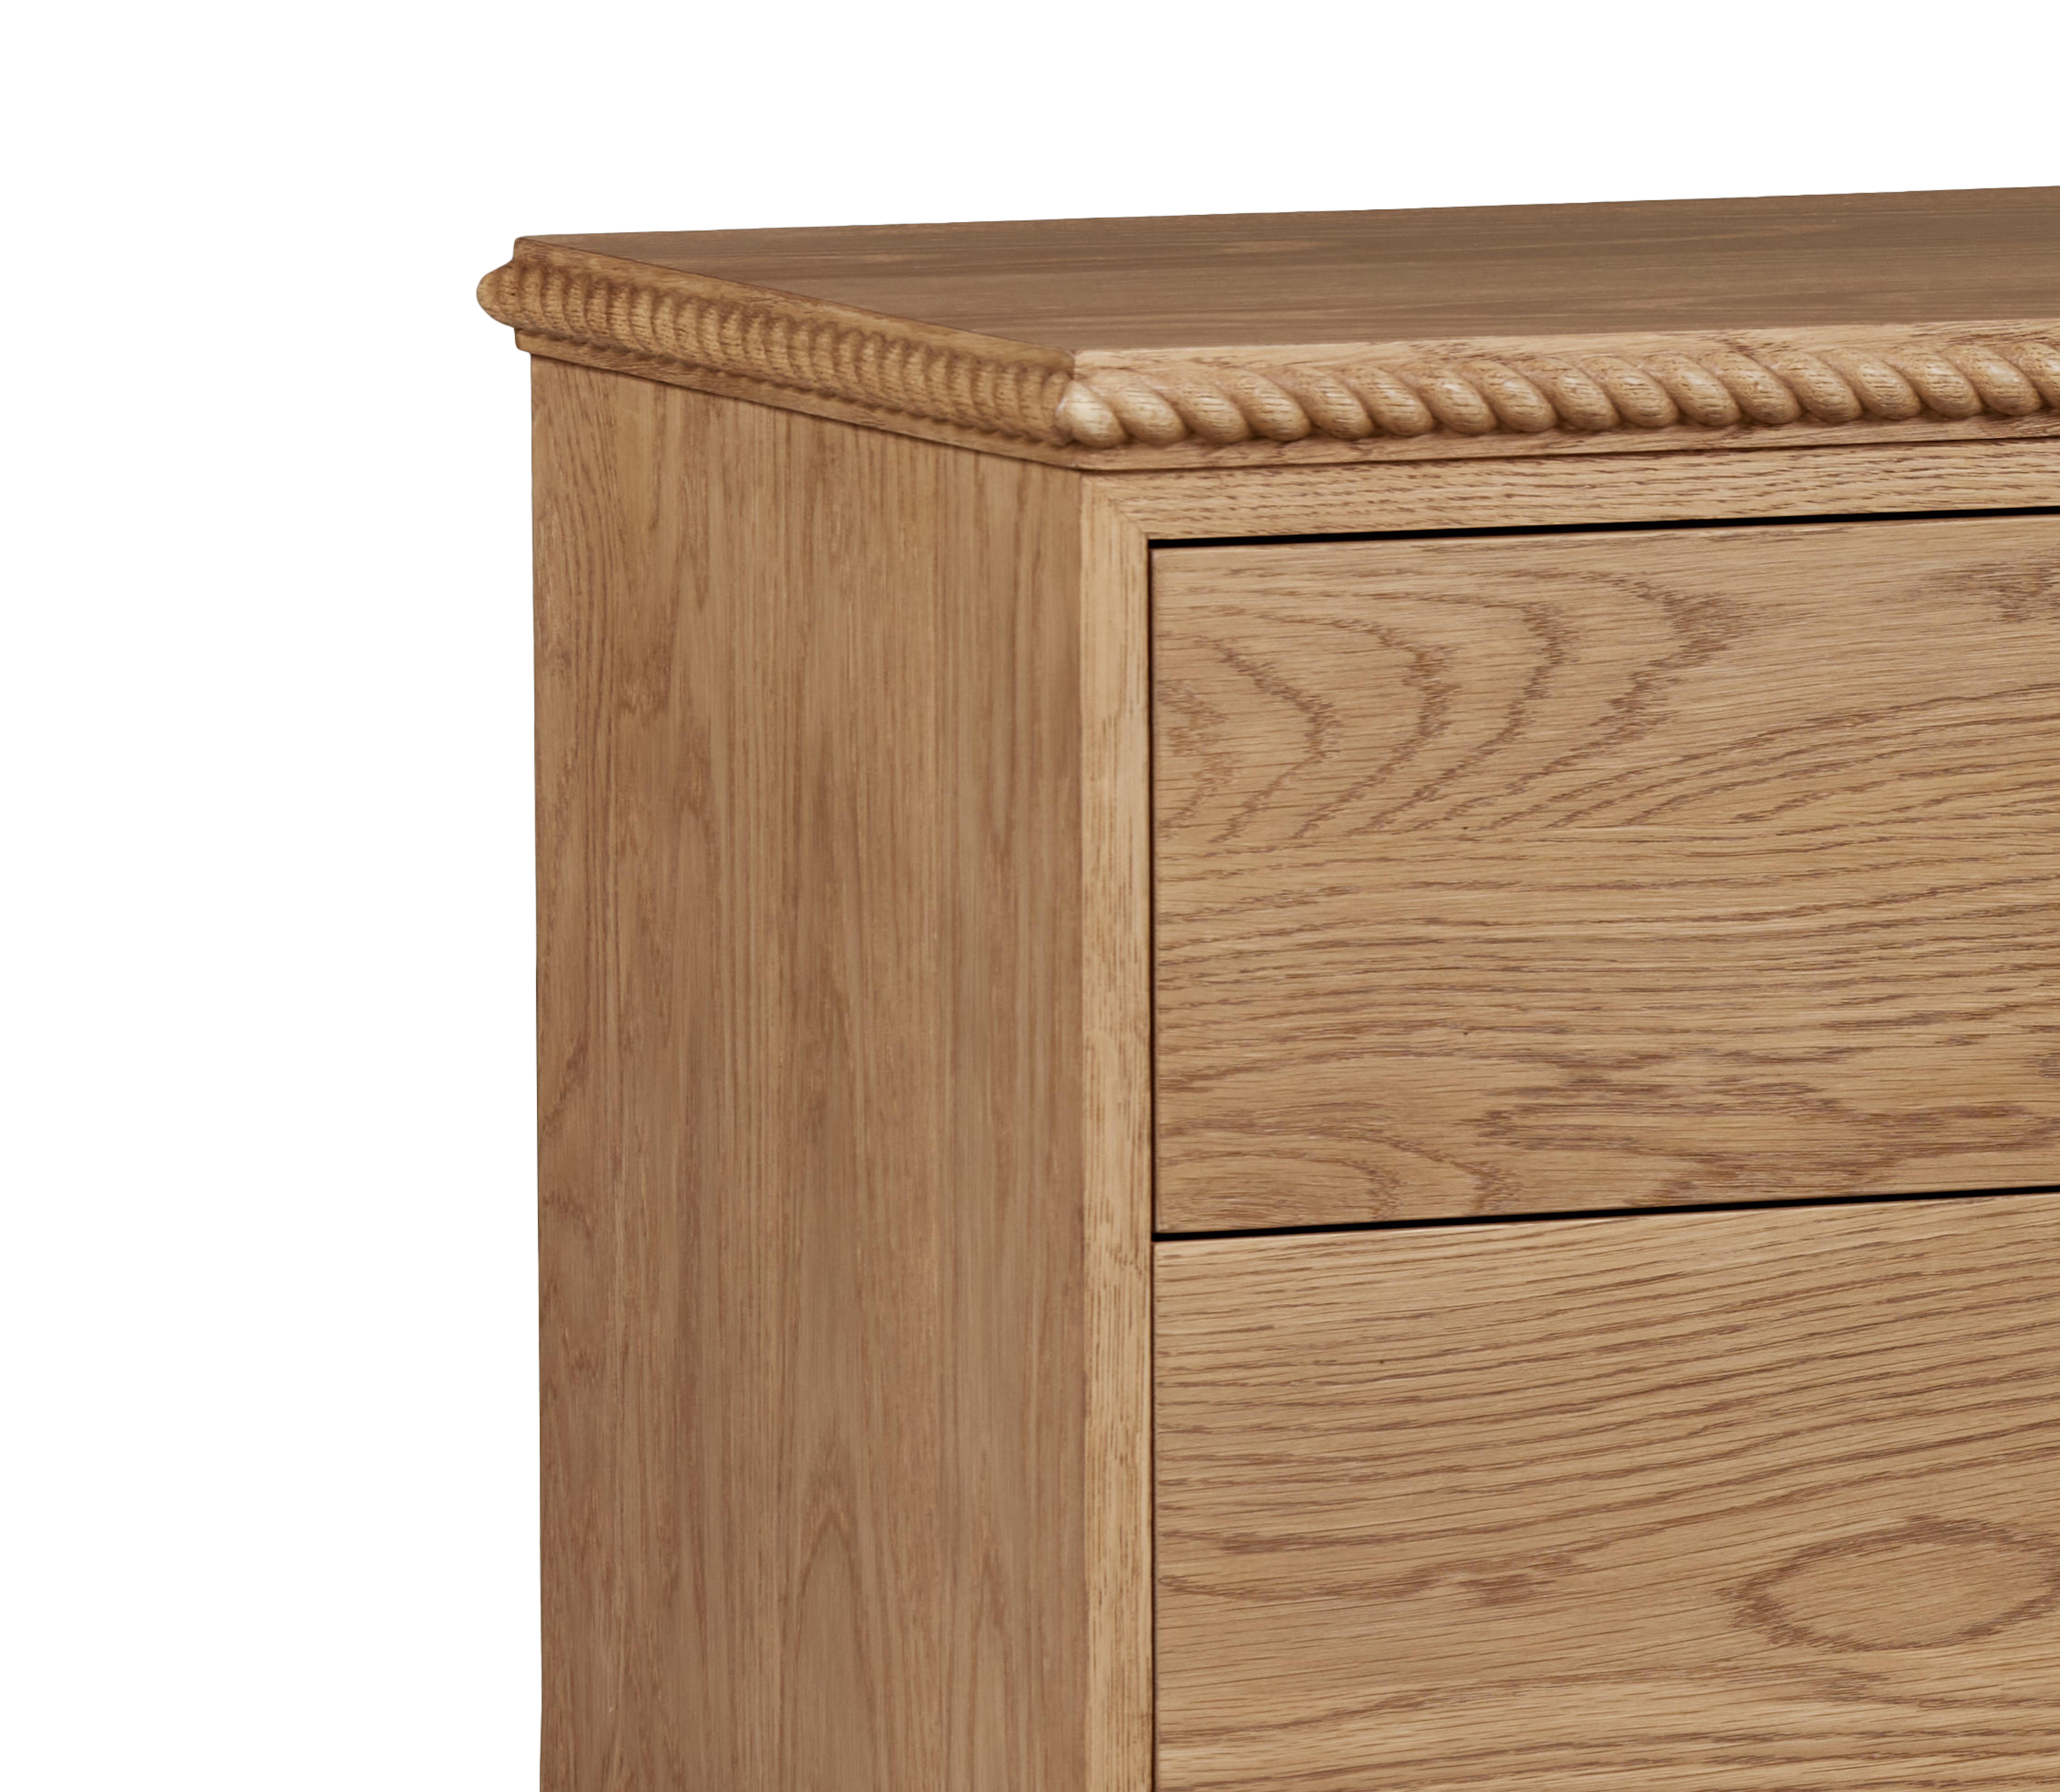 Woodwork Rey Bedside Table, in Summer Aged Oak, by August Abode For Sale